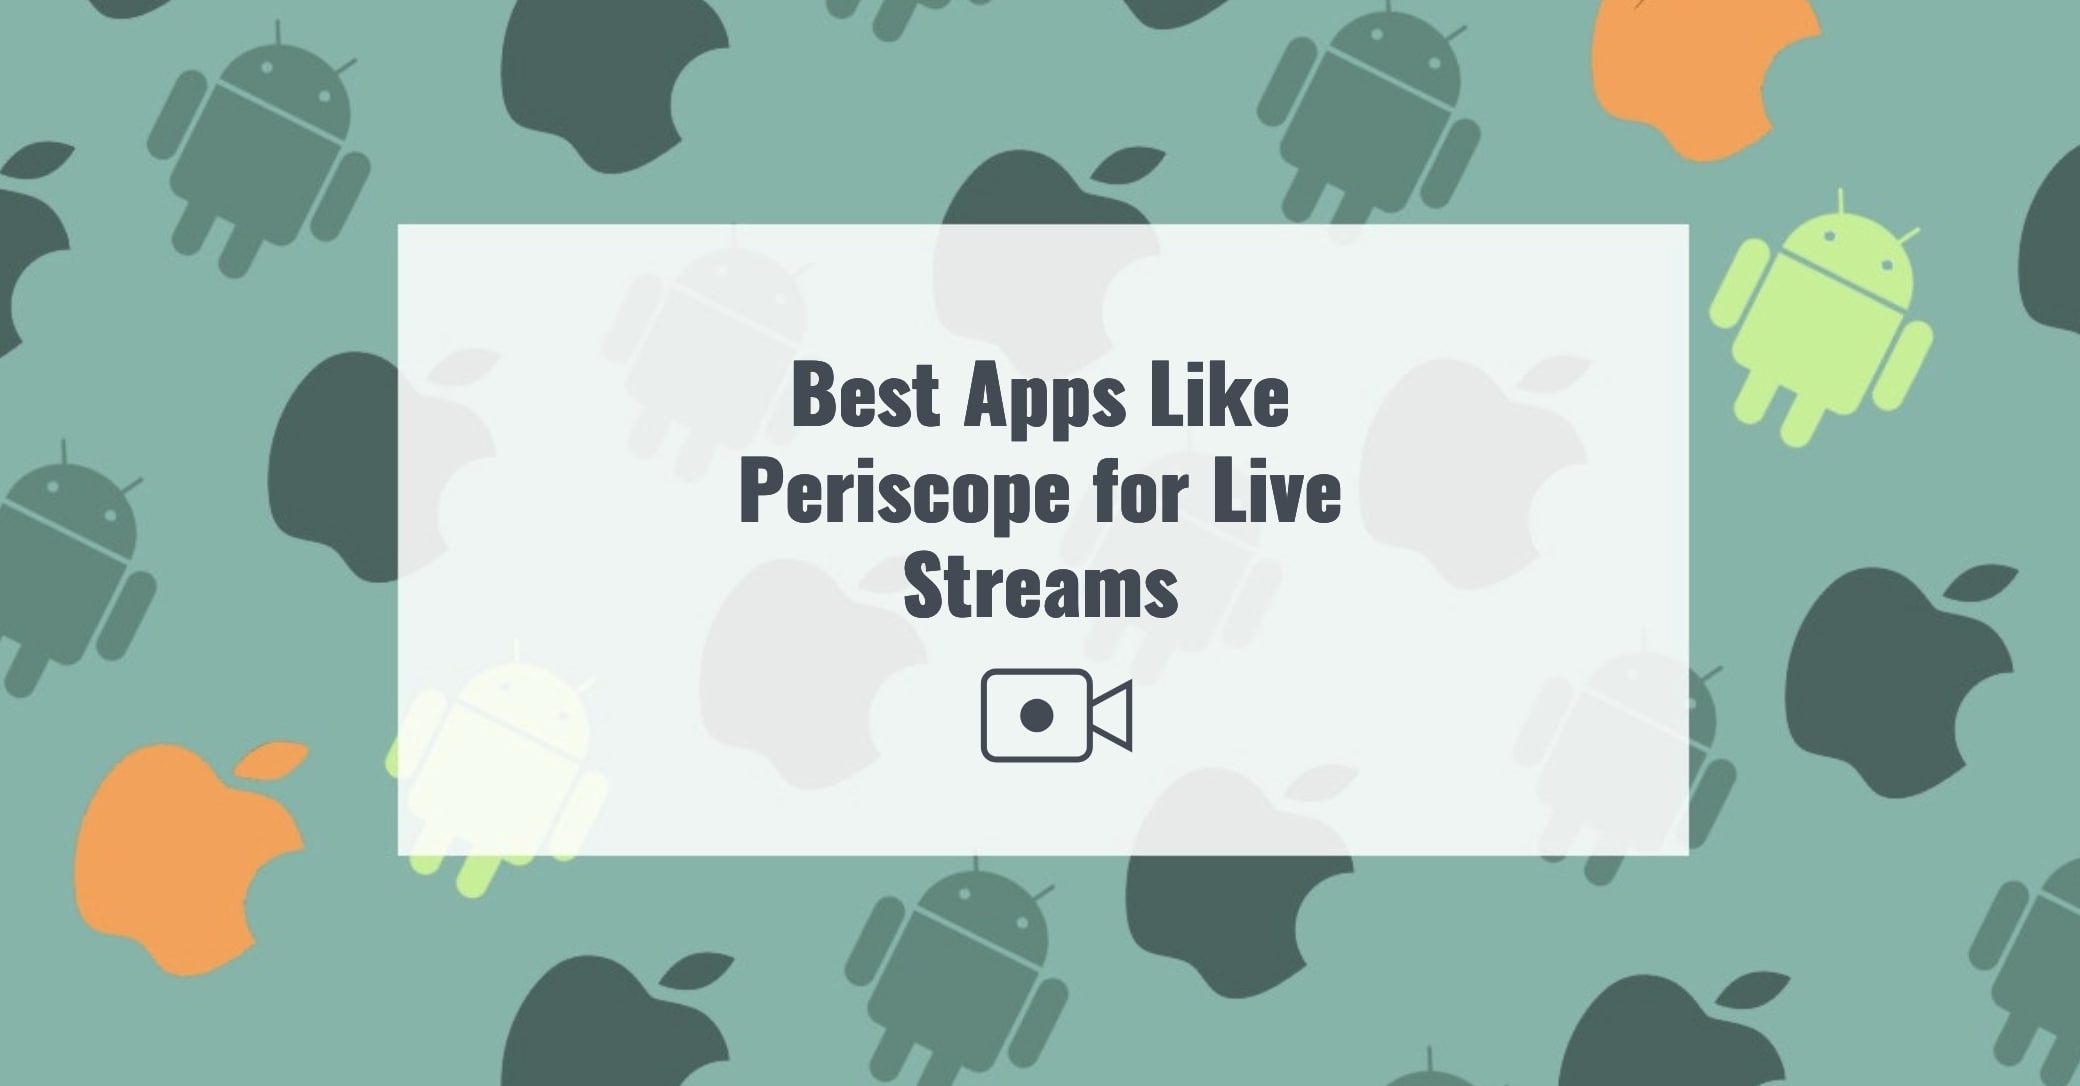 Best Apps Like Periscope for Live Streams